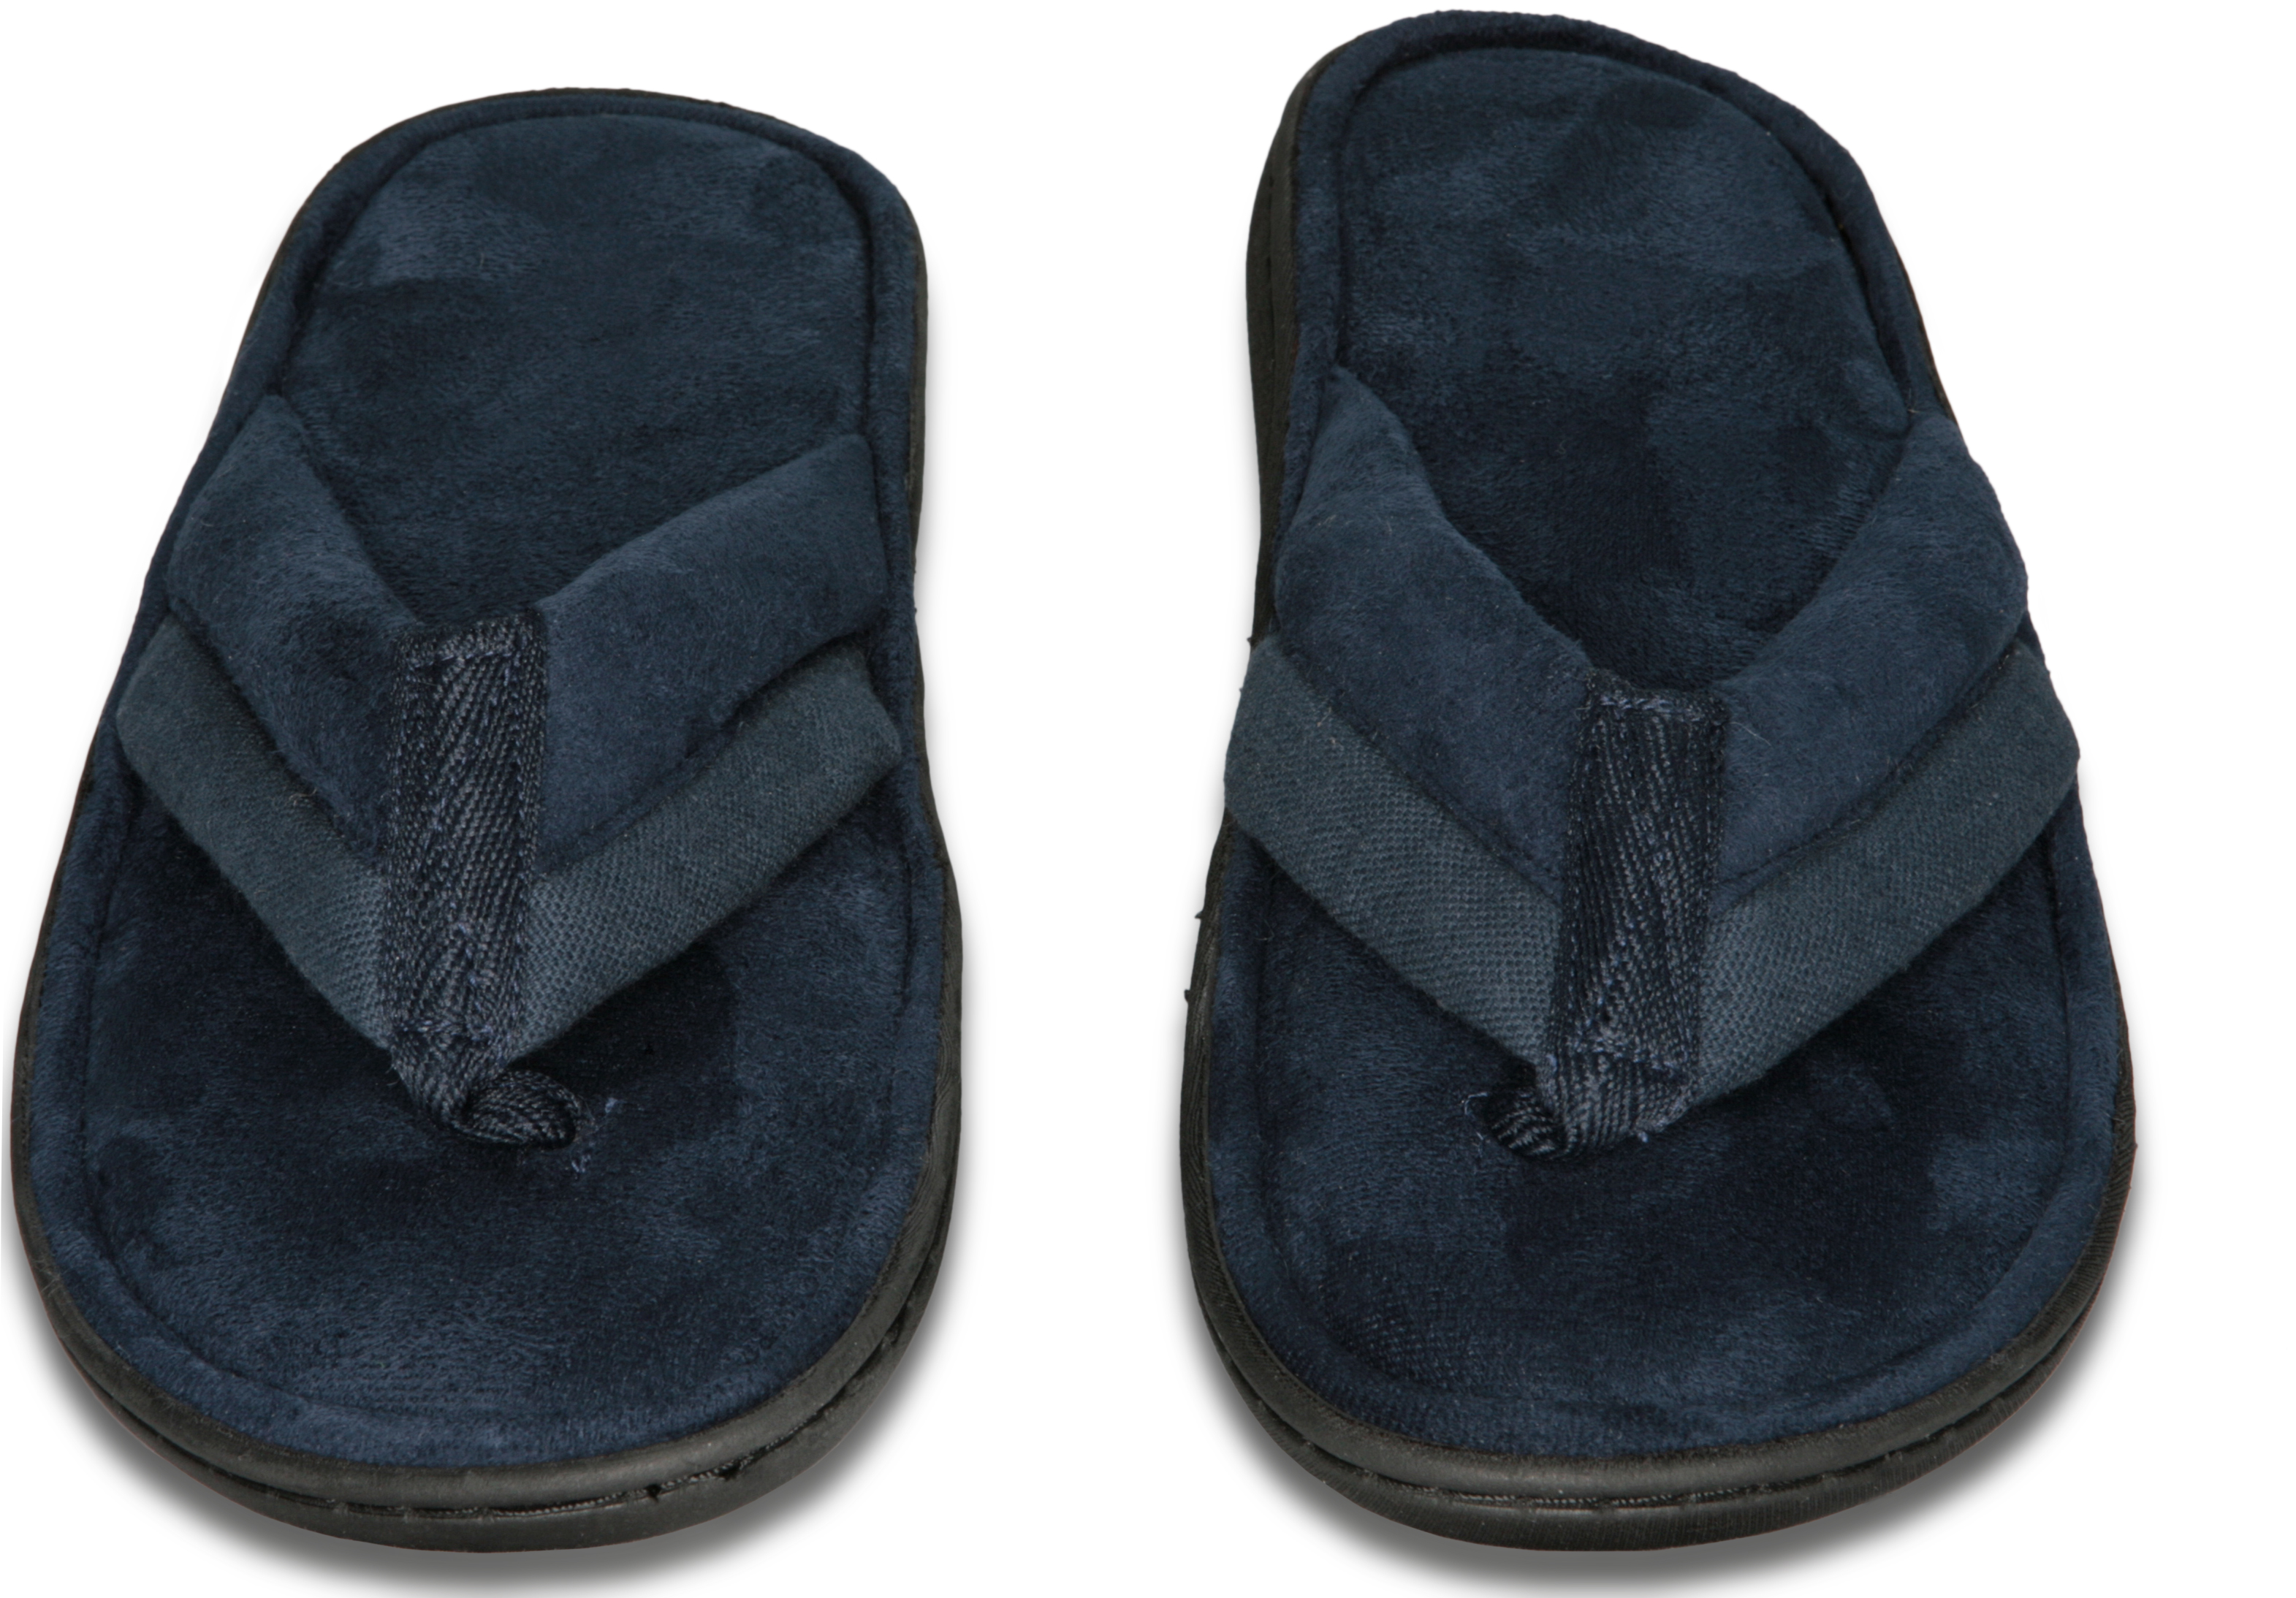 Deluxe Comfort Mens Memory Foam Slipper, Size 11-12 - Soft Linen 120D SBR Insole & Rubber Outsole - Pure Suede Shoes - Non Marking Sole - Mens Slippers, Blue - image 4 of 4